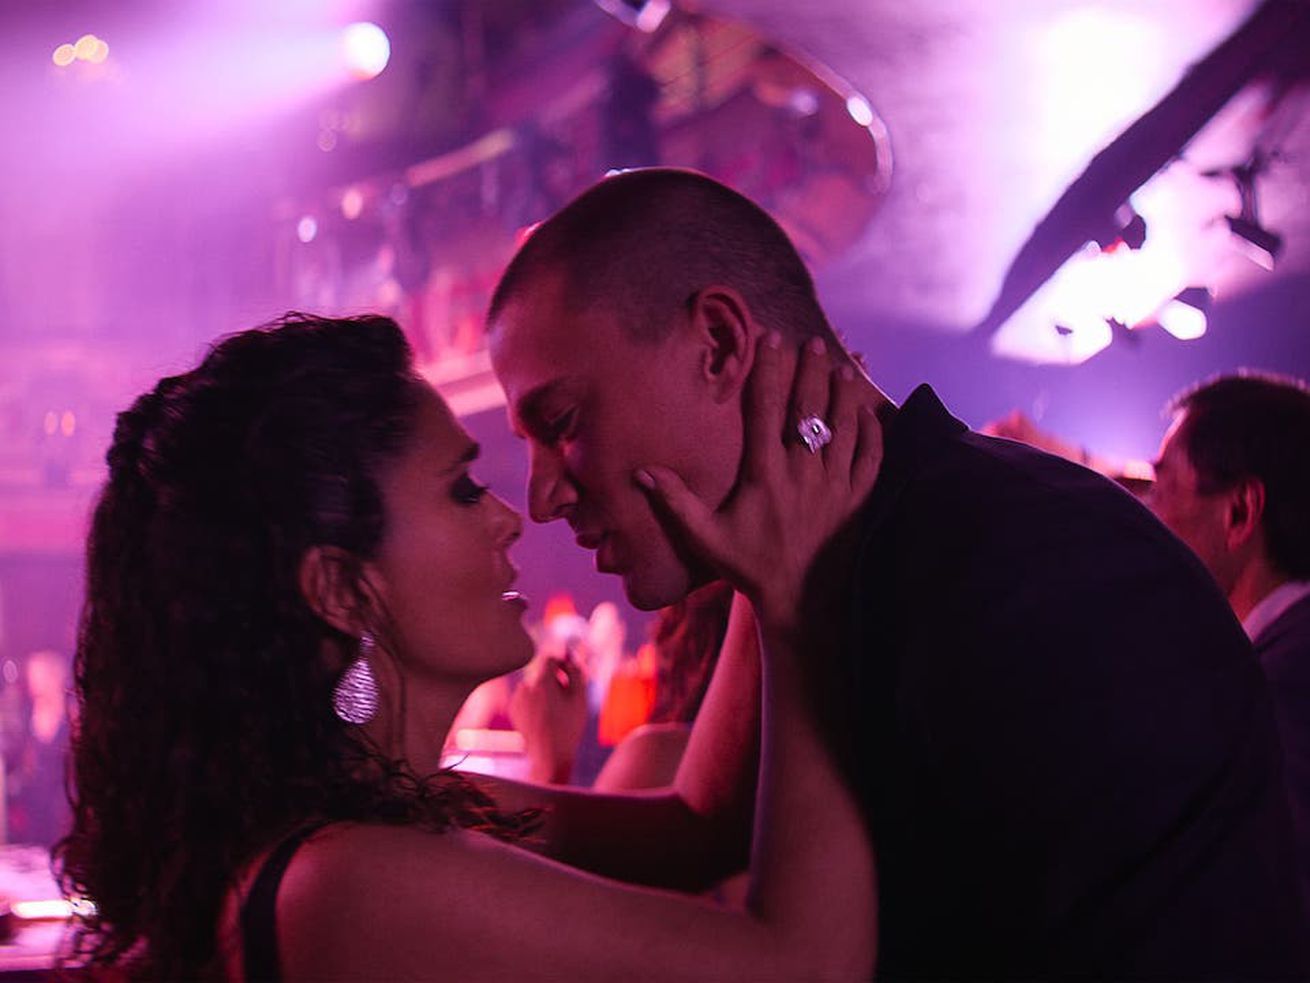 Salma Hayek Pinault and Channing Tatum go in for a kiss inside a nightclub.